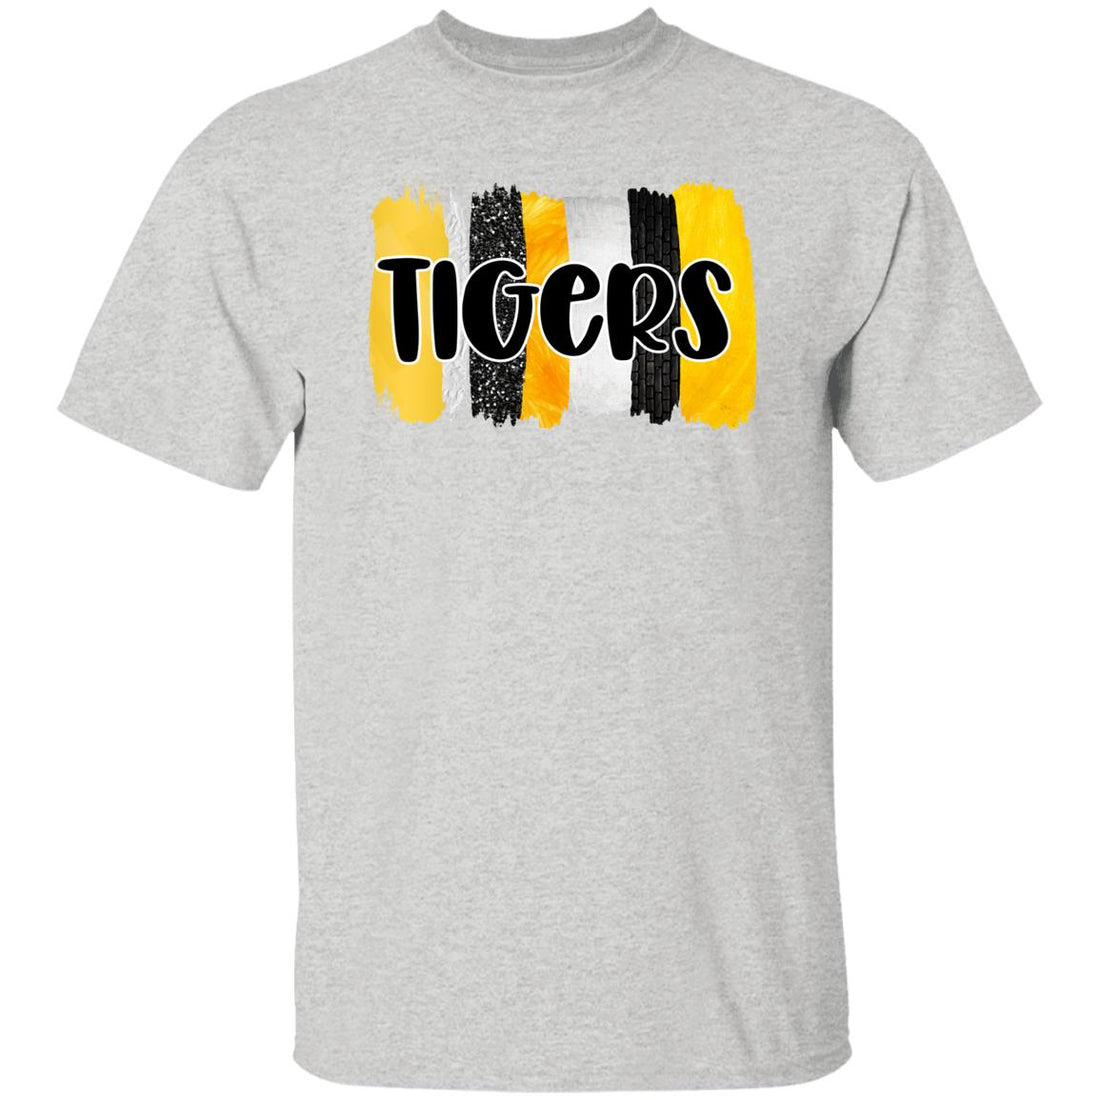 Tigers Paint Swipe T-Shirt - T-Shirts - Positively Sassy - Tigers Paint Swipe T-Shirt